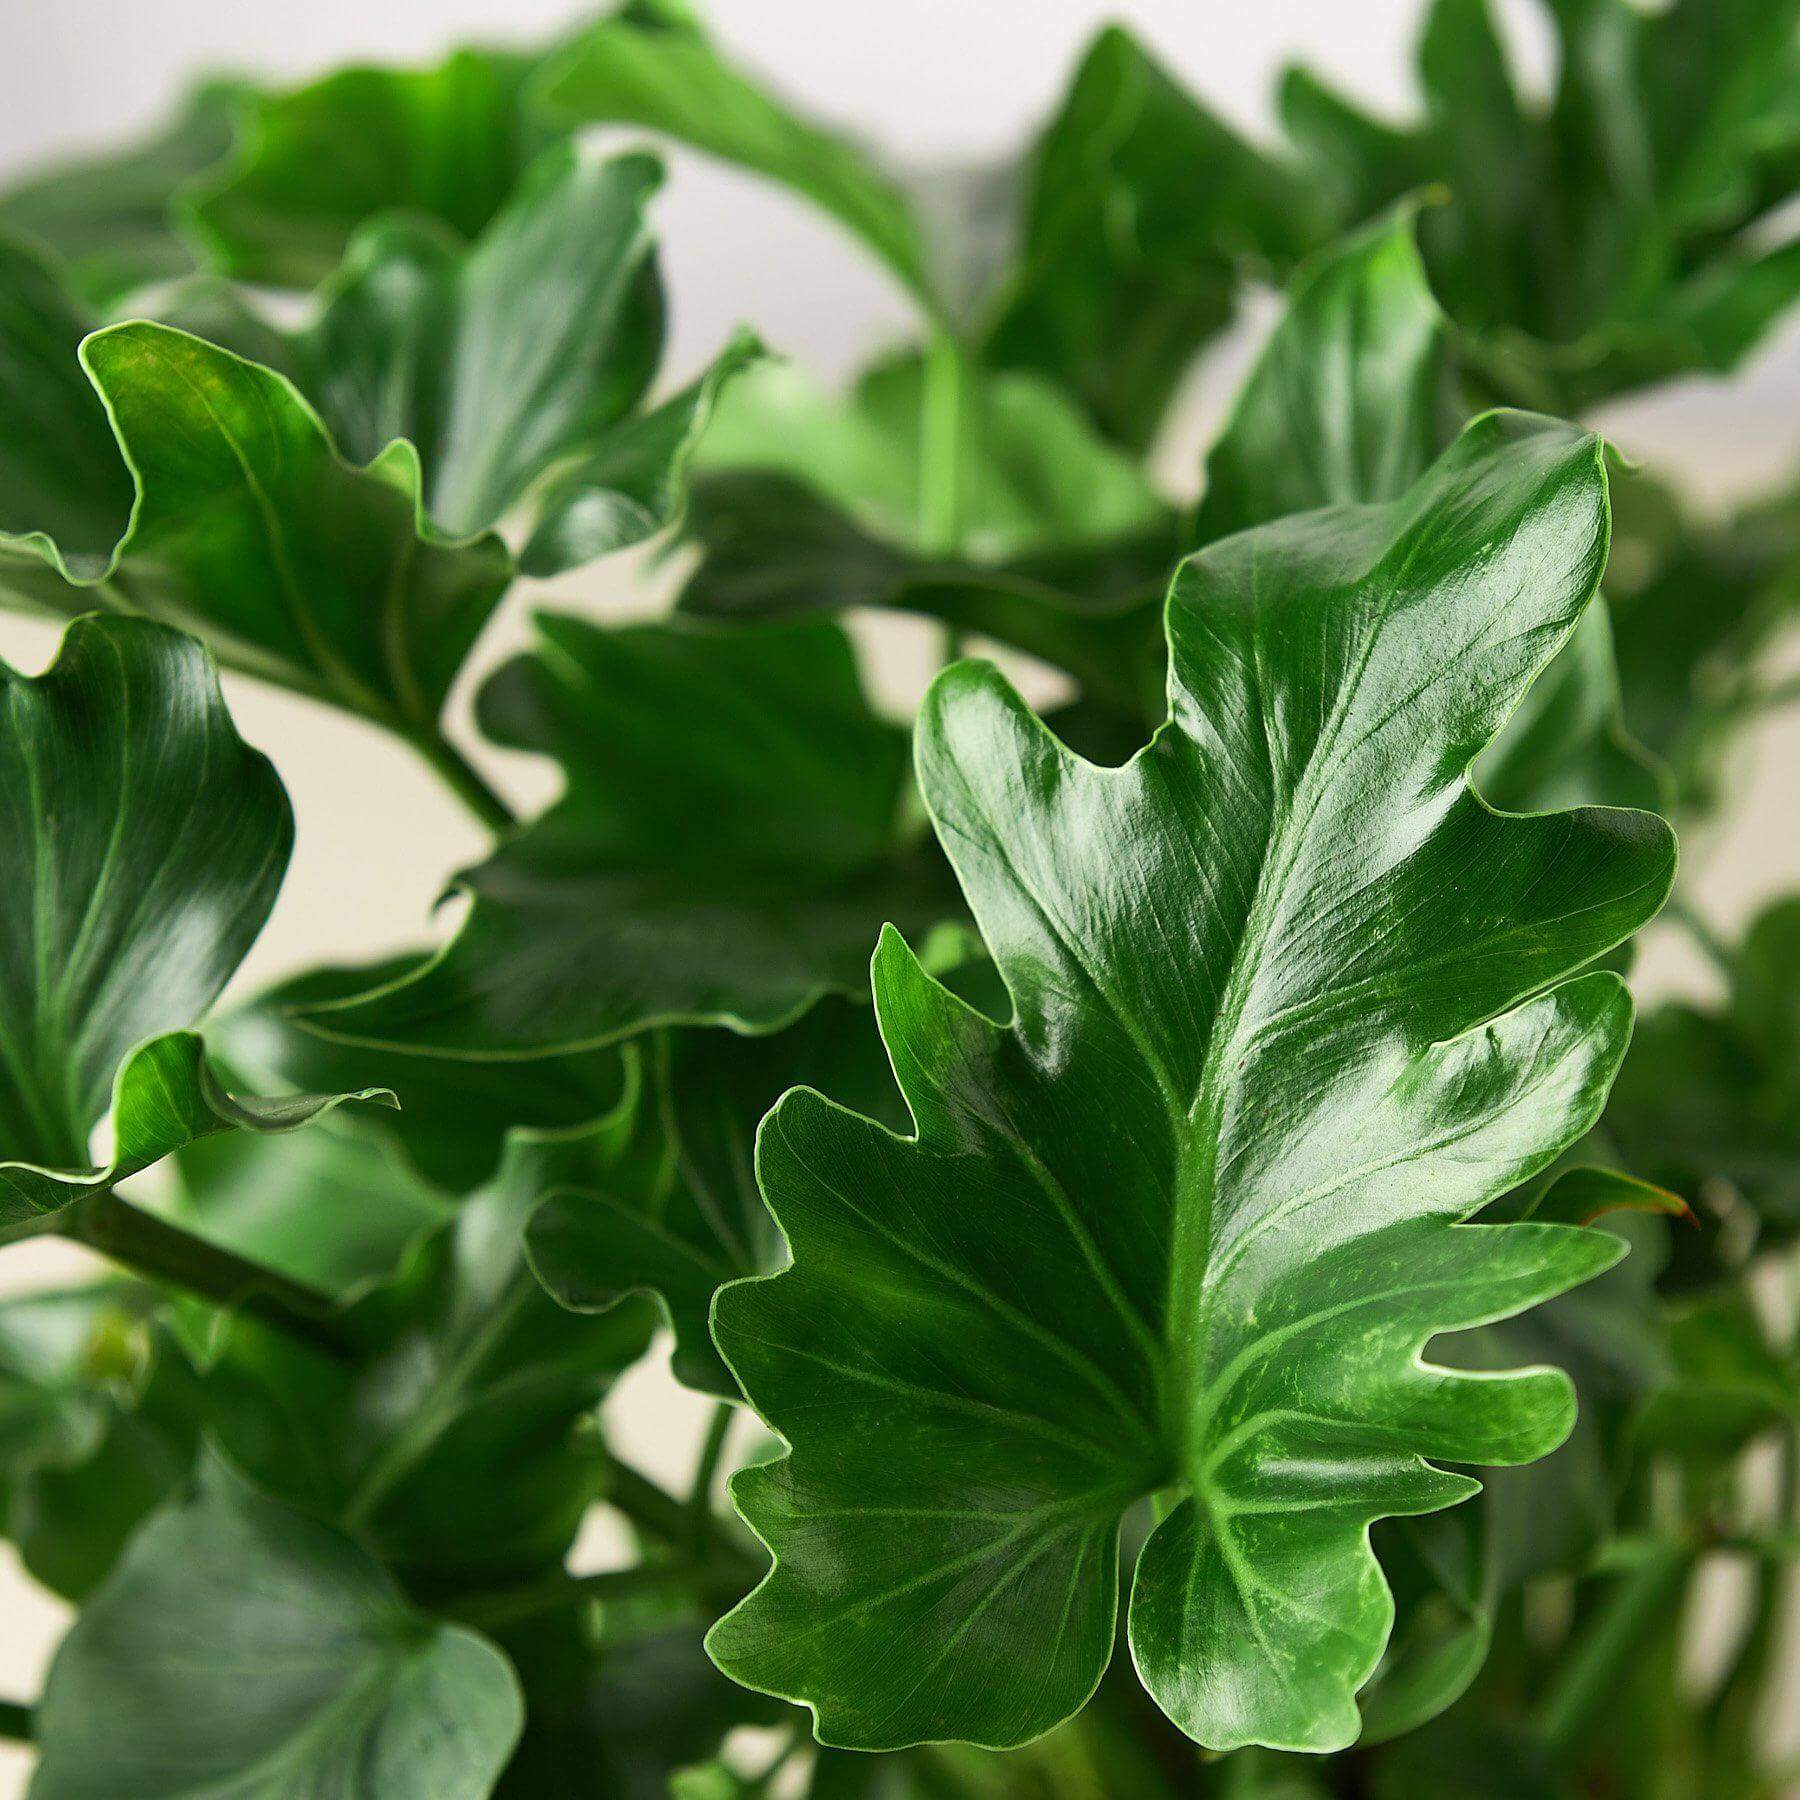 Philodendron - Little Hope | Modern house plants that clean the air